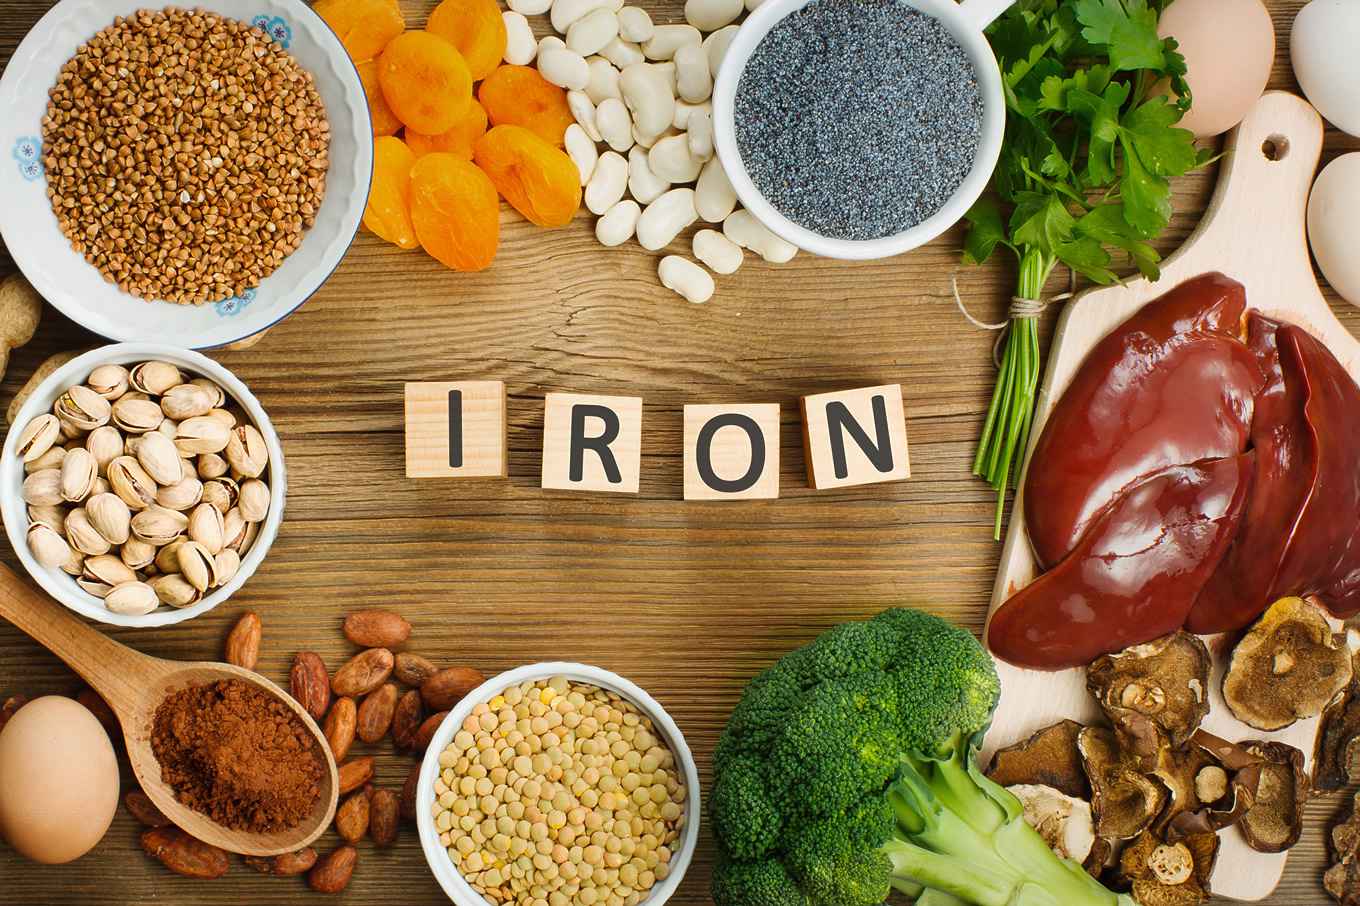 Replace Your Iron Source From Processed Meats With These 5 Foods